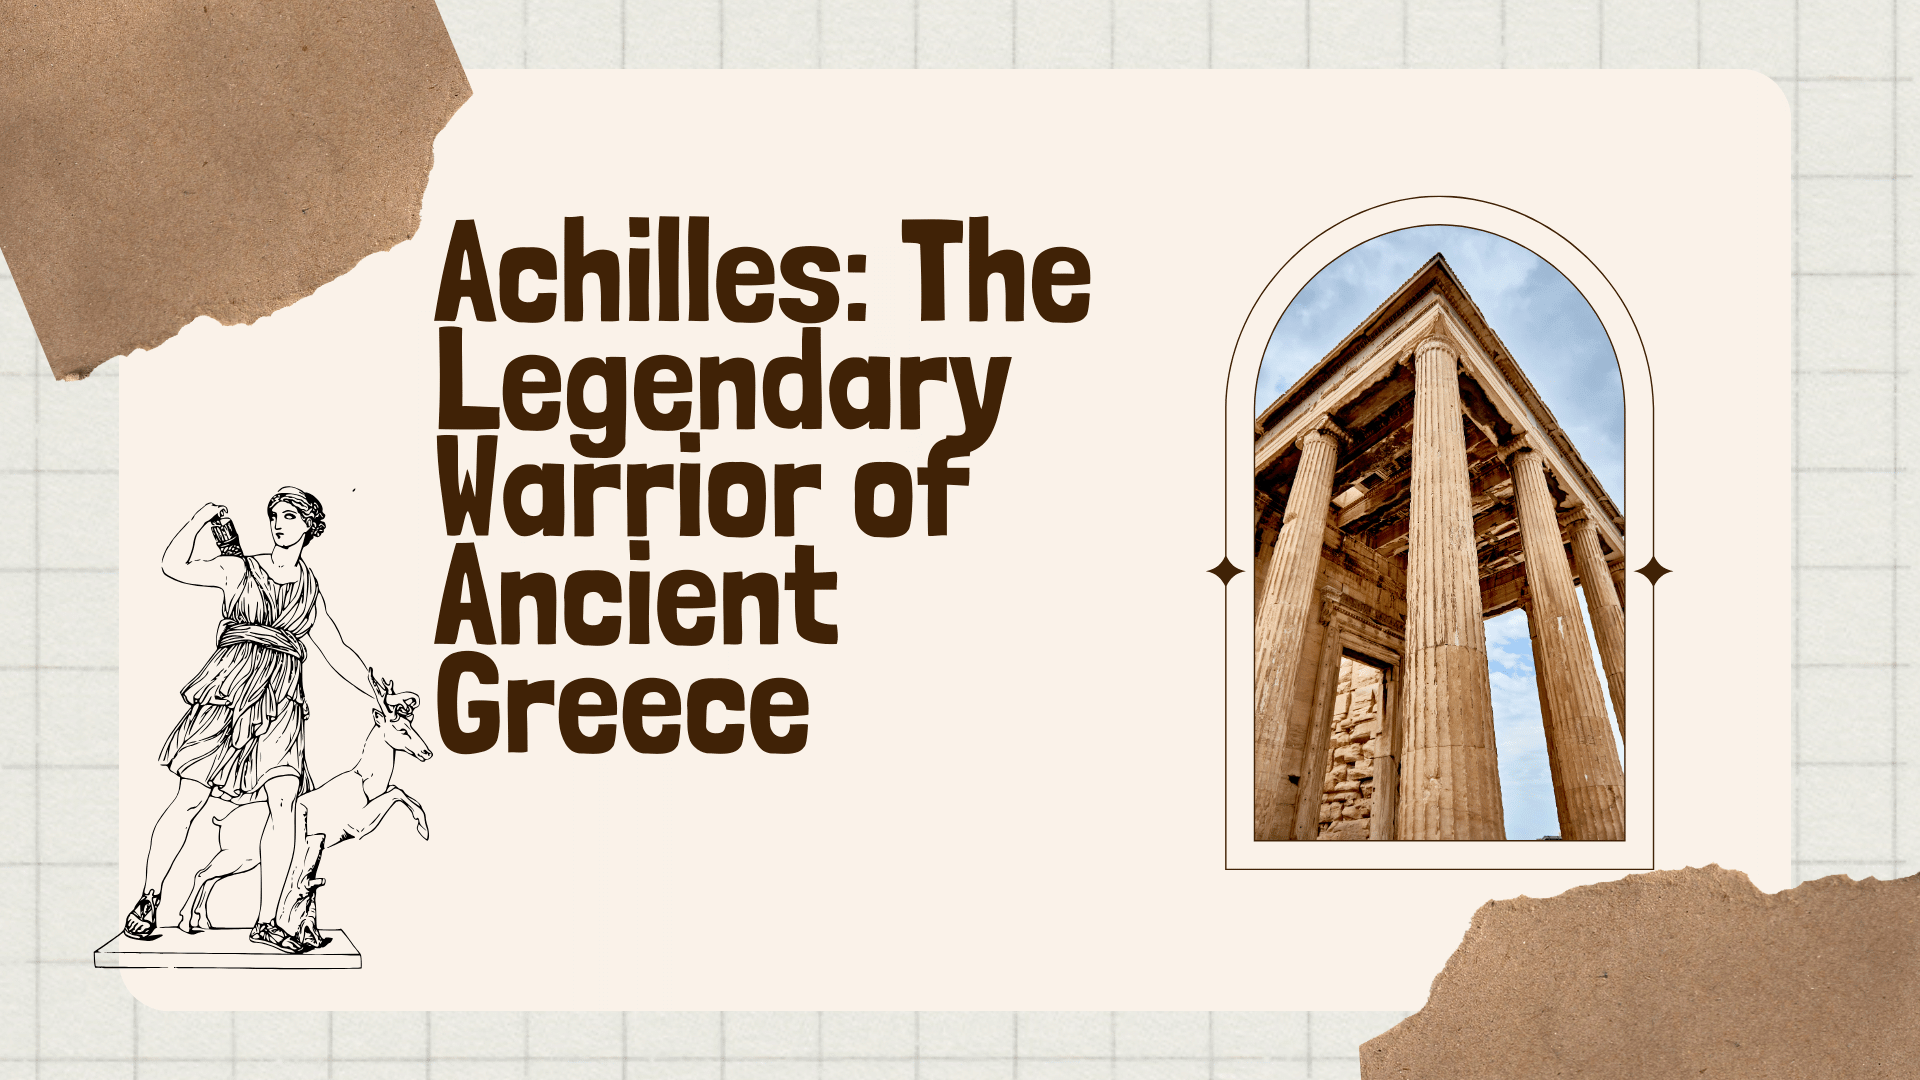 Achilles: The Legendary Warrior of Ancient Greece